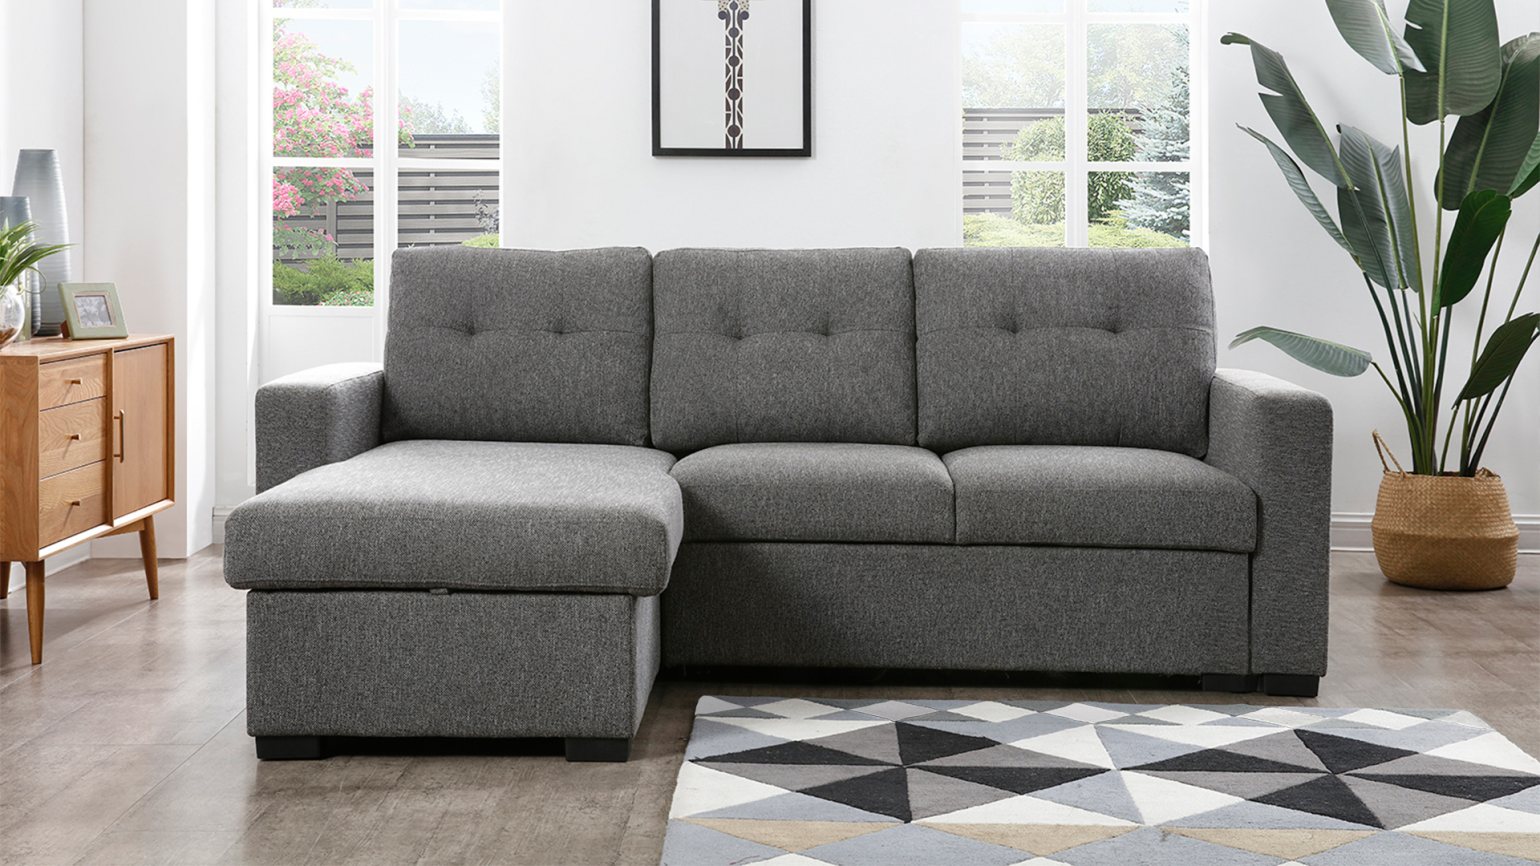 kyoto futons dover sofa bed